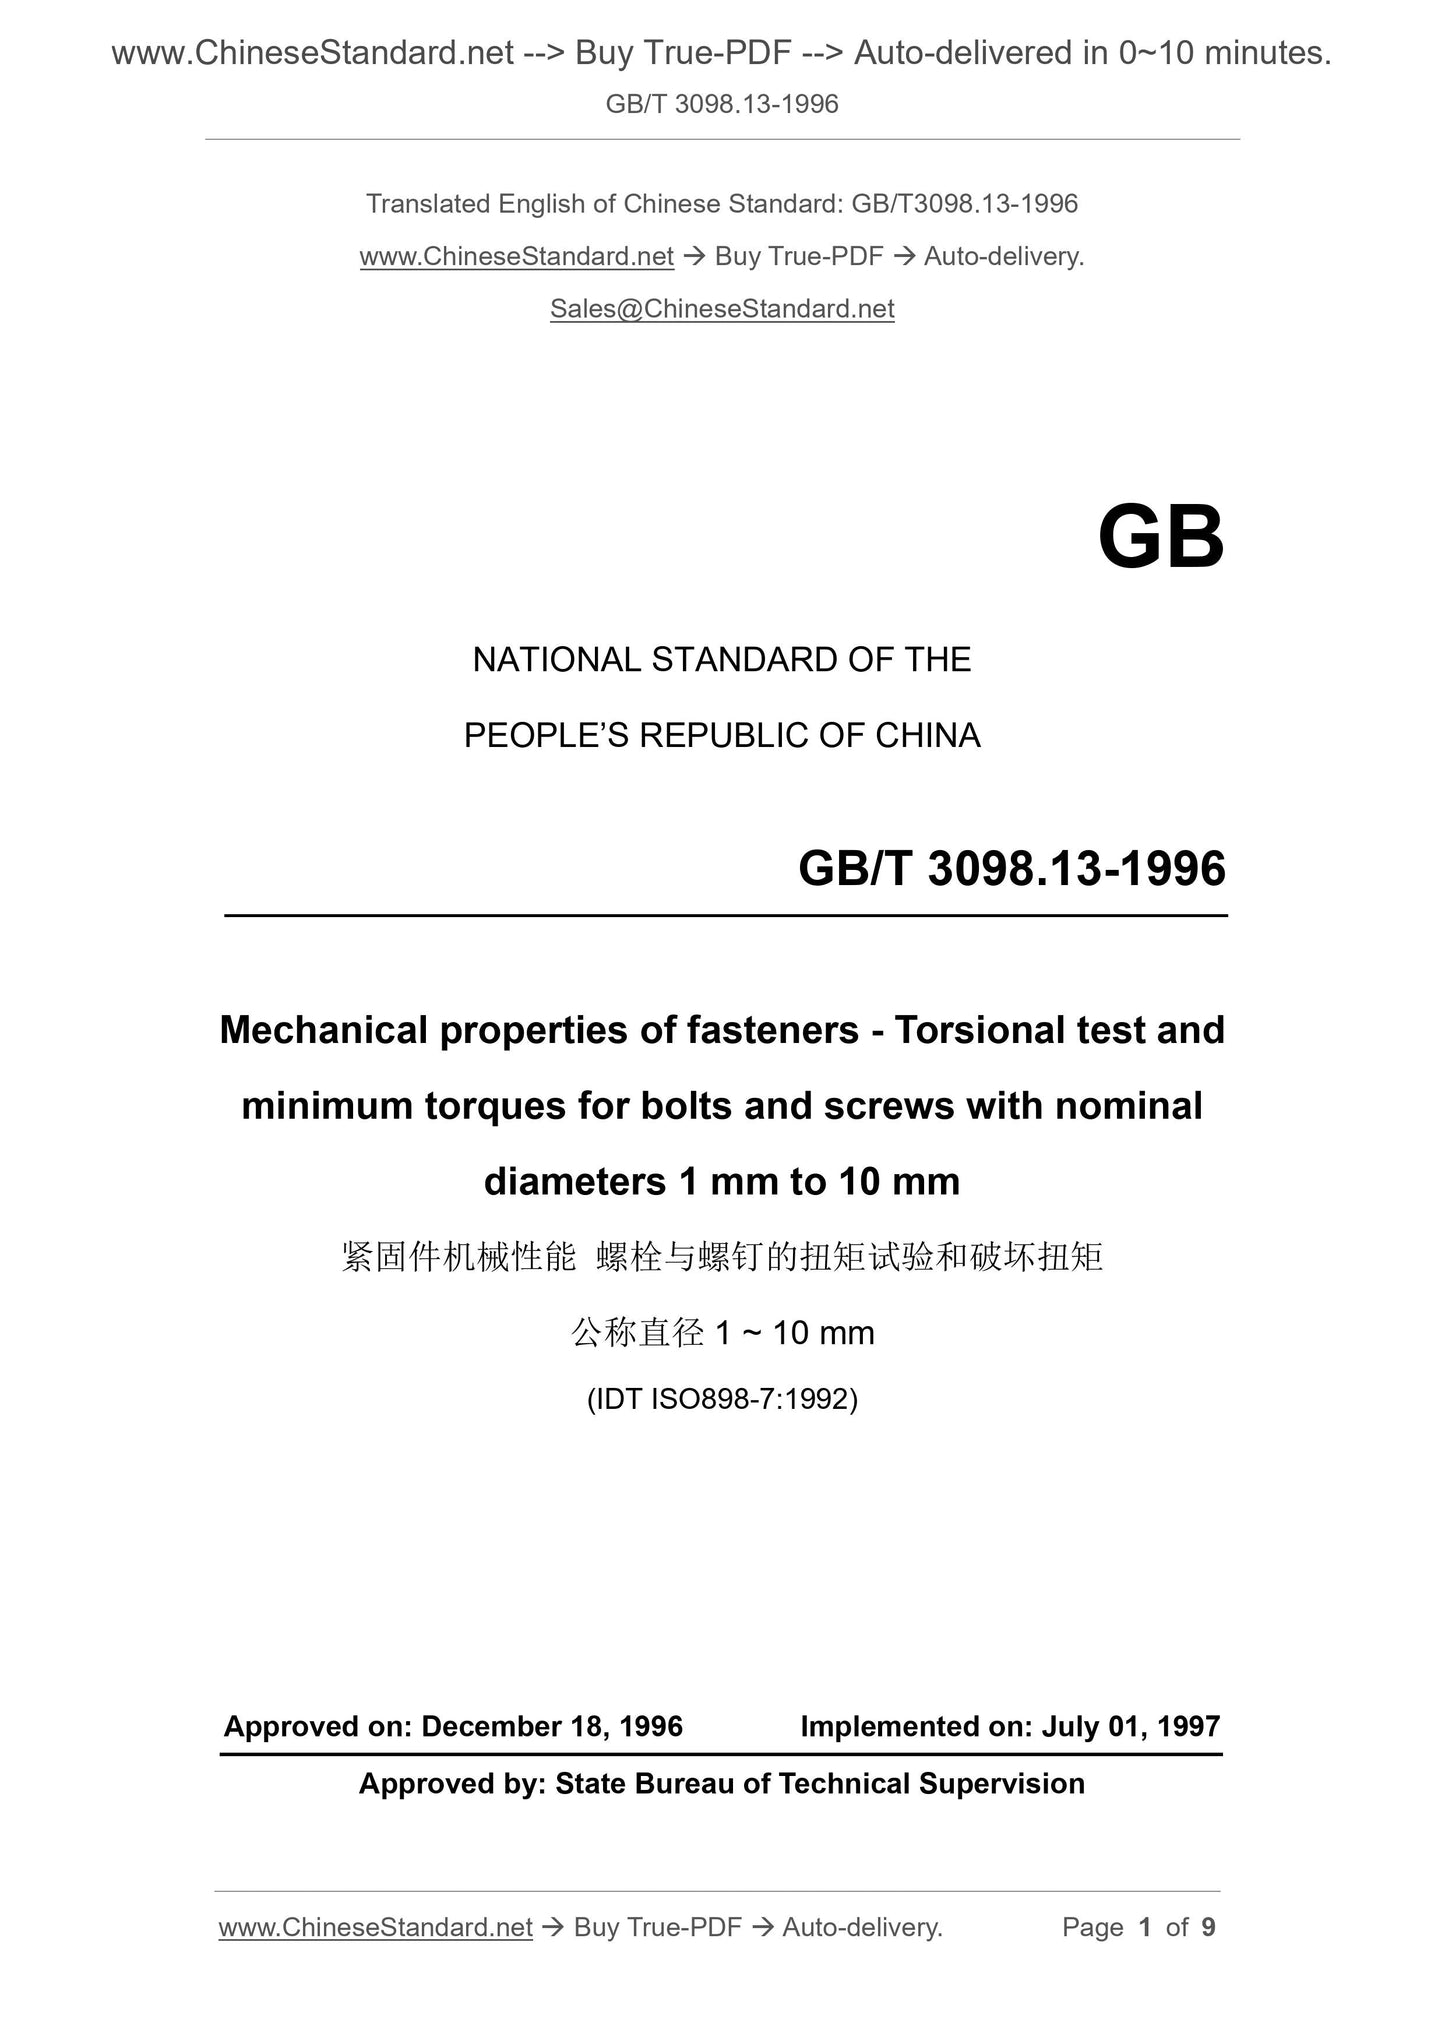 GB/T 3098.13-1996 Page 1